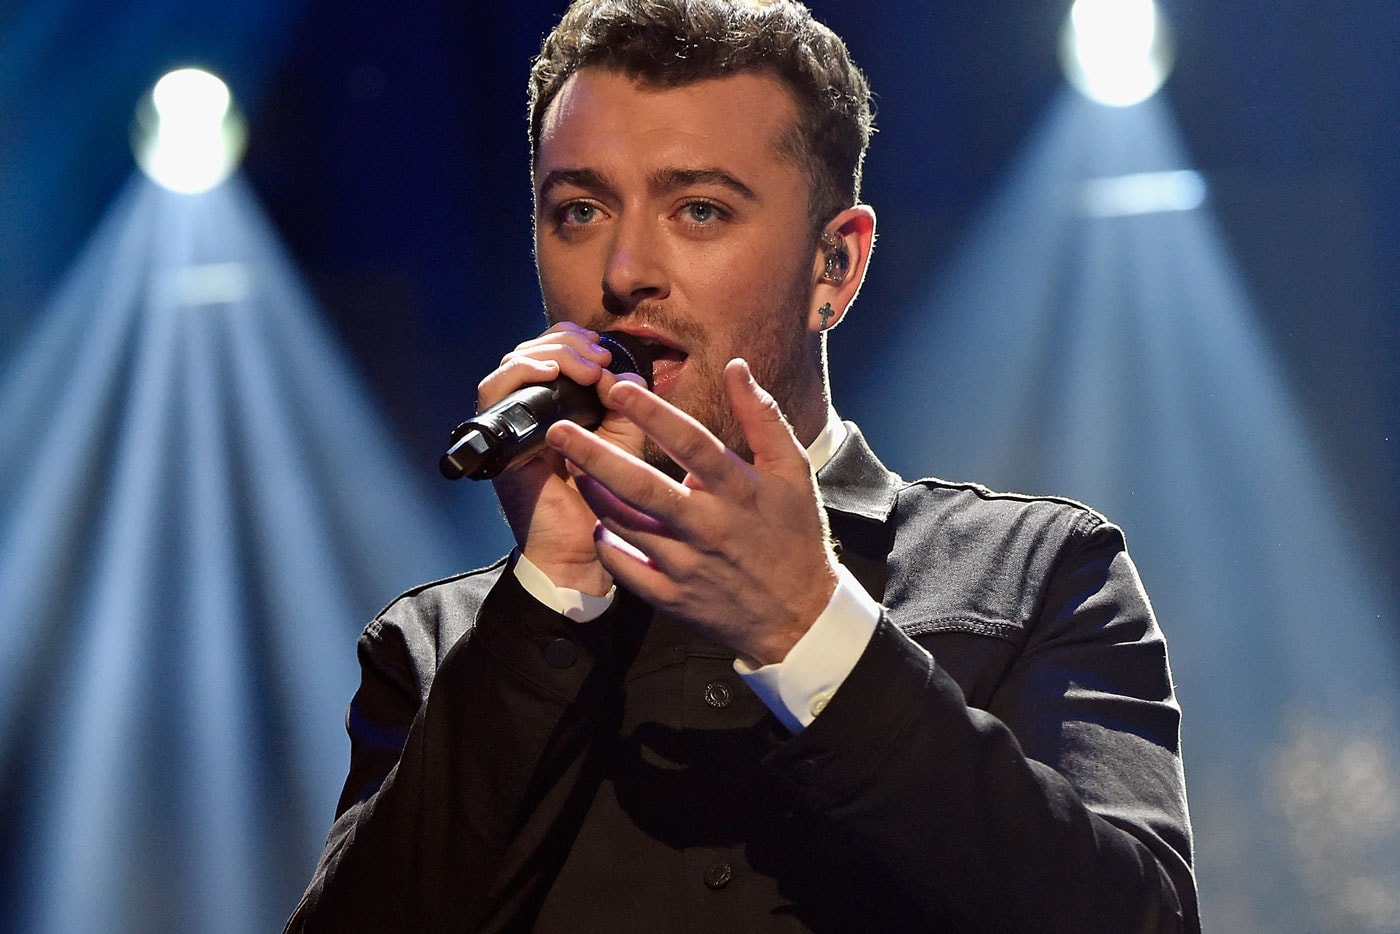 Watch Sam Smith Perform "Writing's On the Wall" With an Orchestra